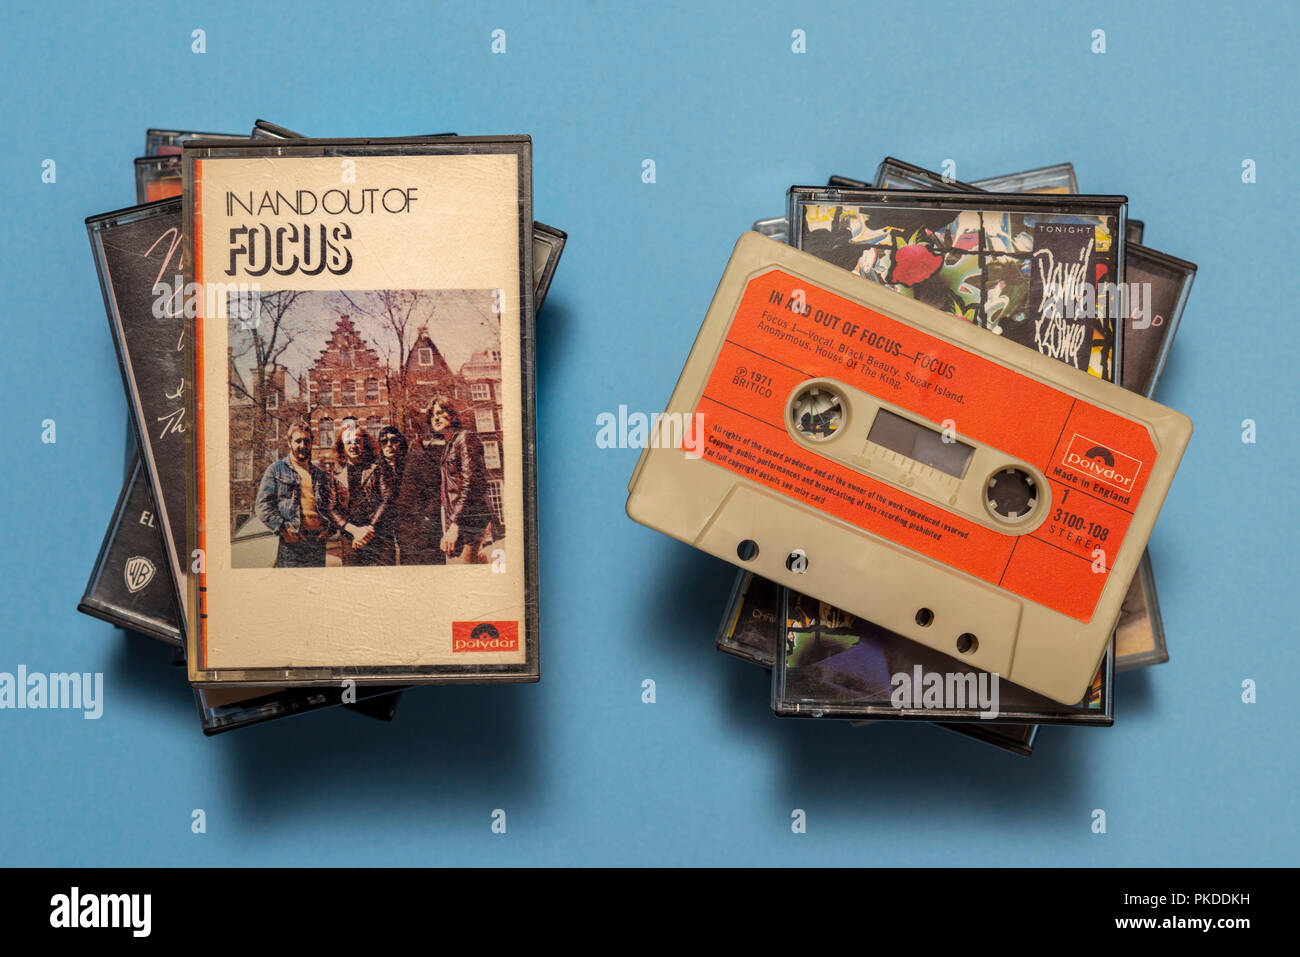 compact audio cassette of Focus, In & Out of Focus album with art work. Stock Photo